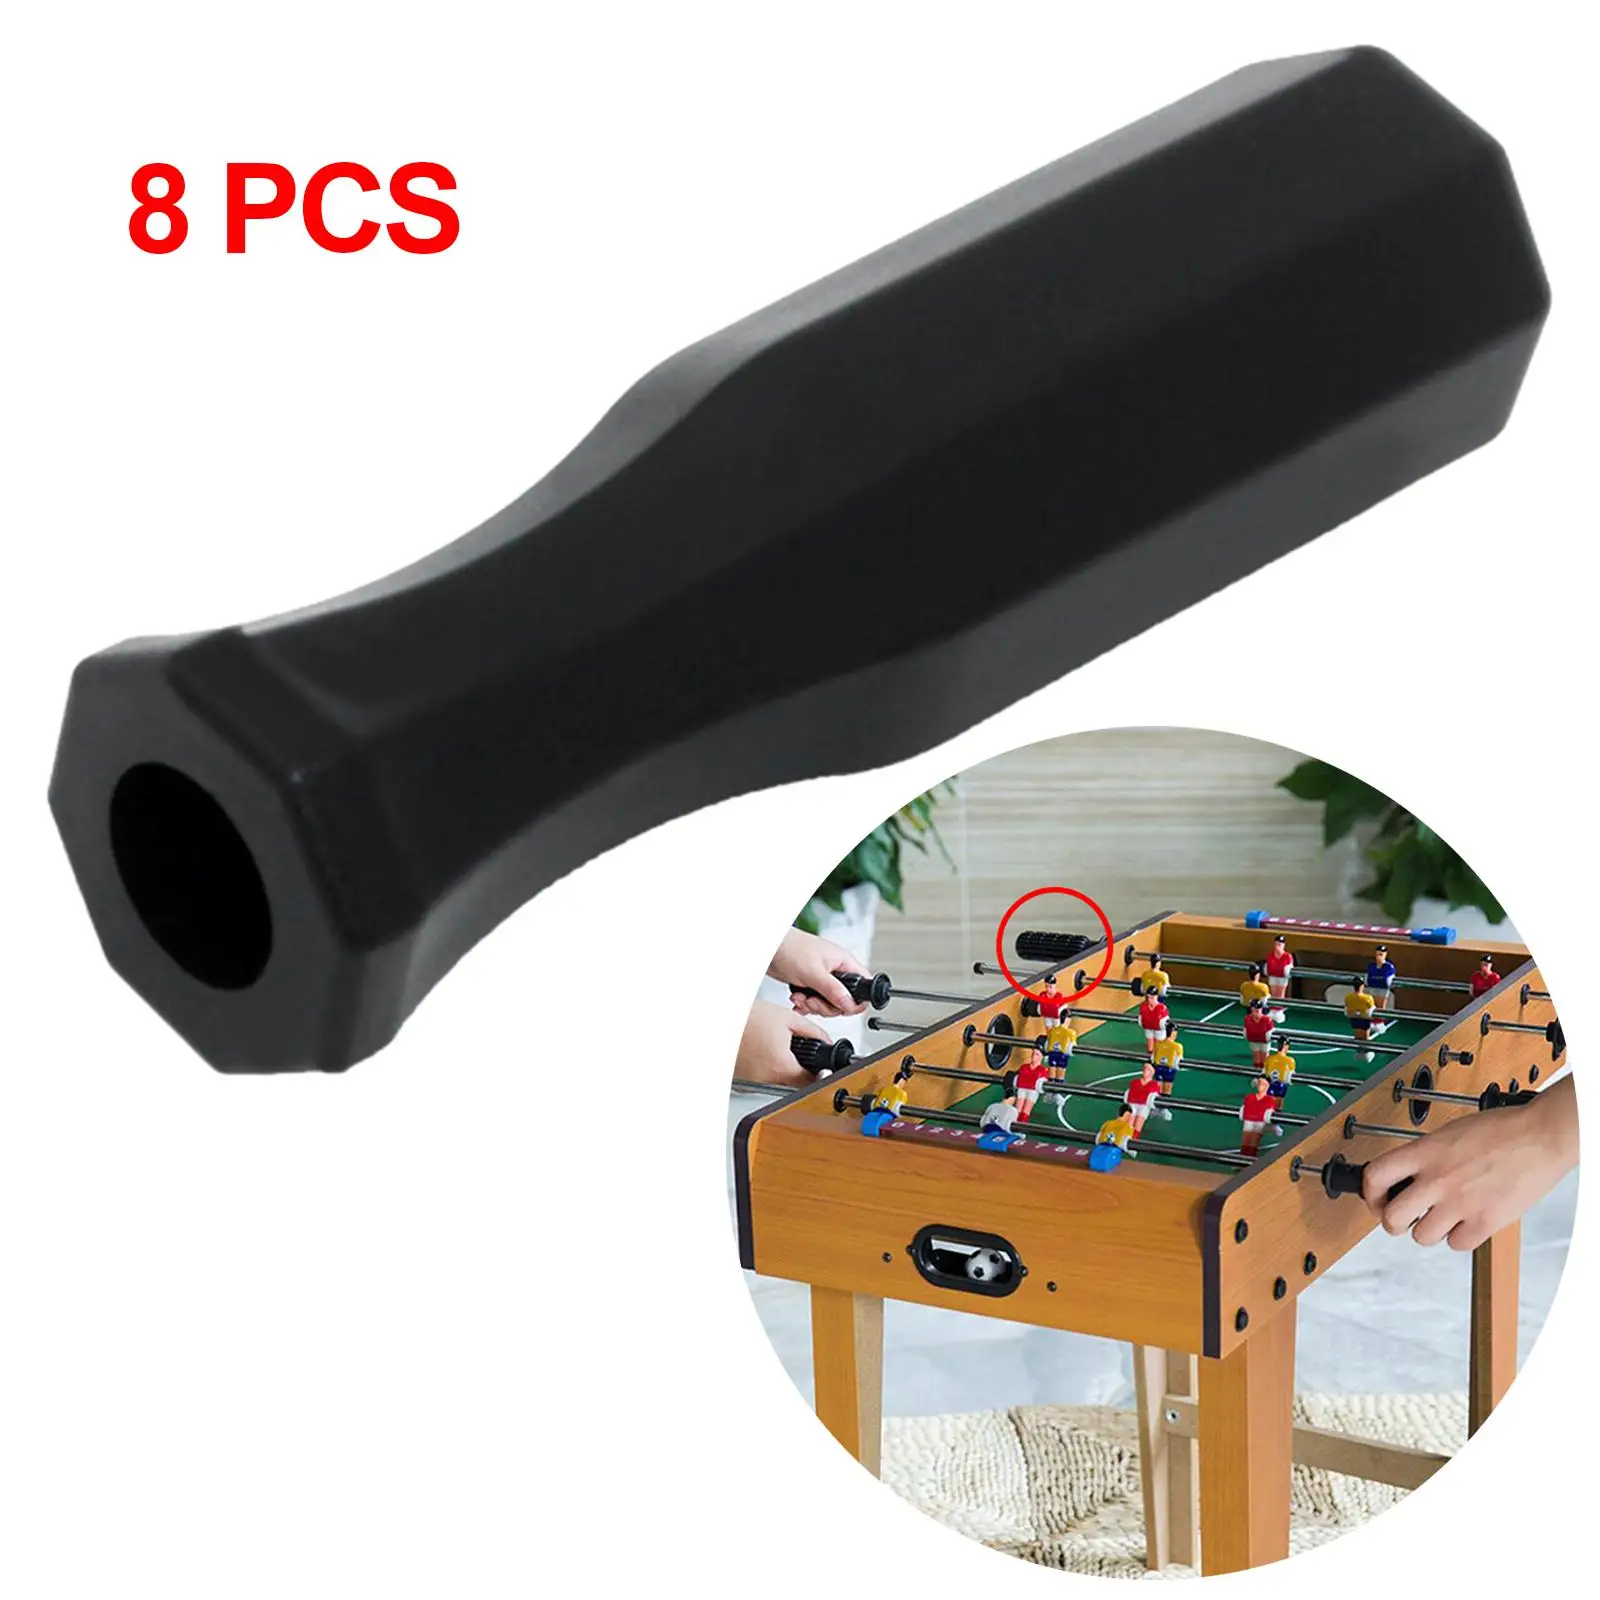 2pcs wood 5/8" rod Foosball Soccer Table football wooden handle grip replacement 